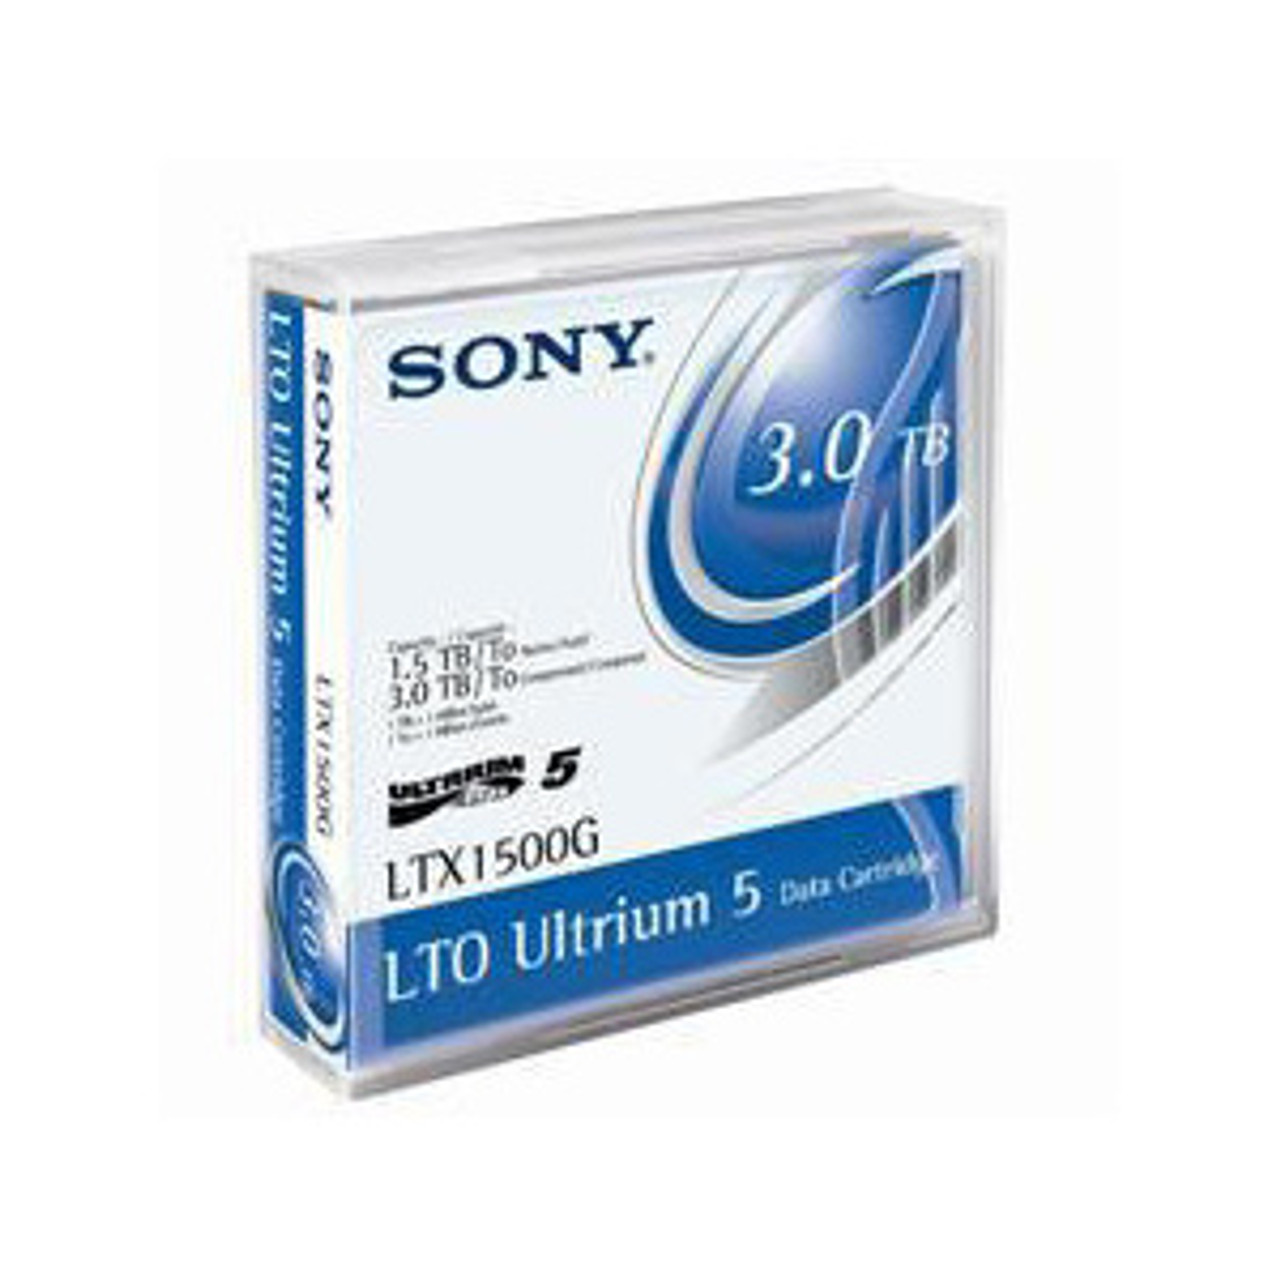 Sony's new magnetic tape technology enables 185 TB cartridges